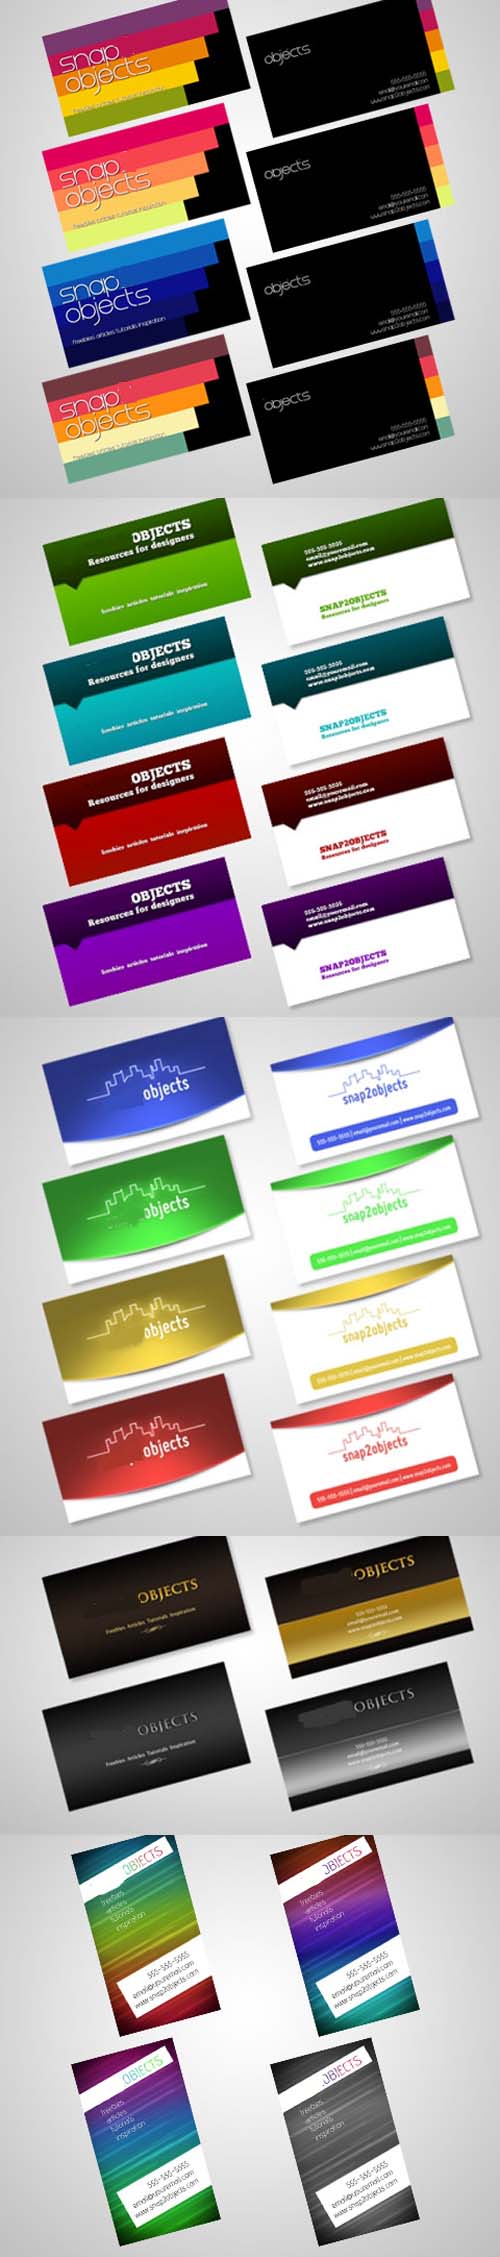 Collection Of Modern Psd Business Cards